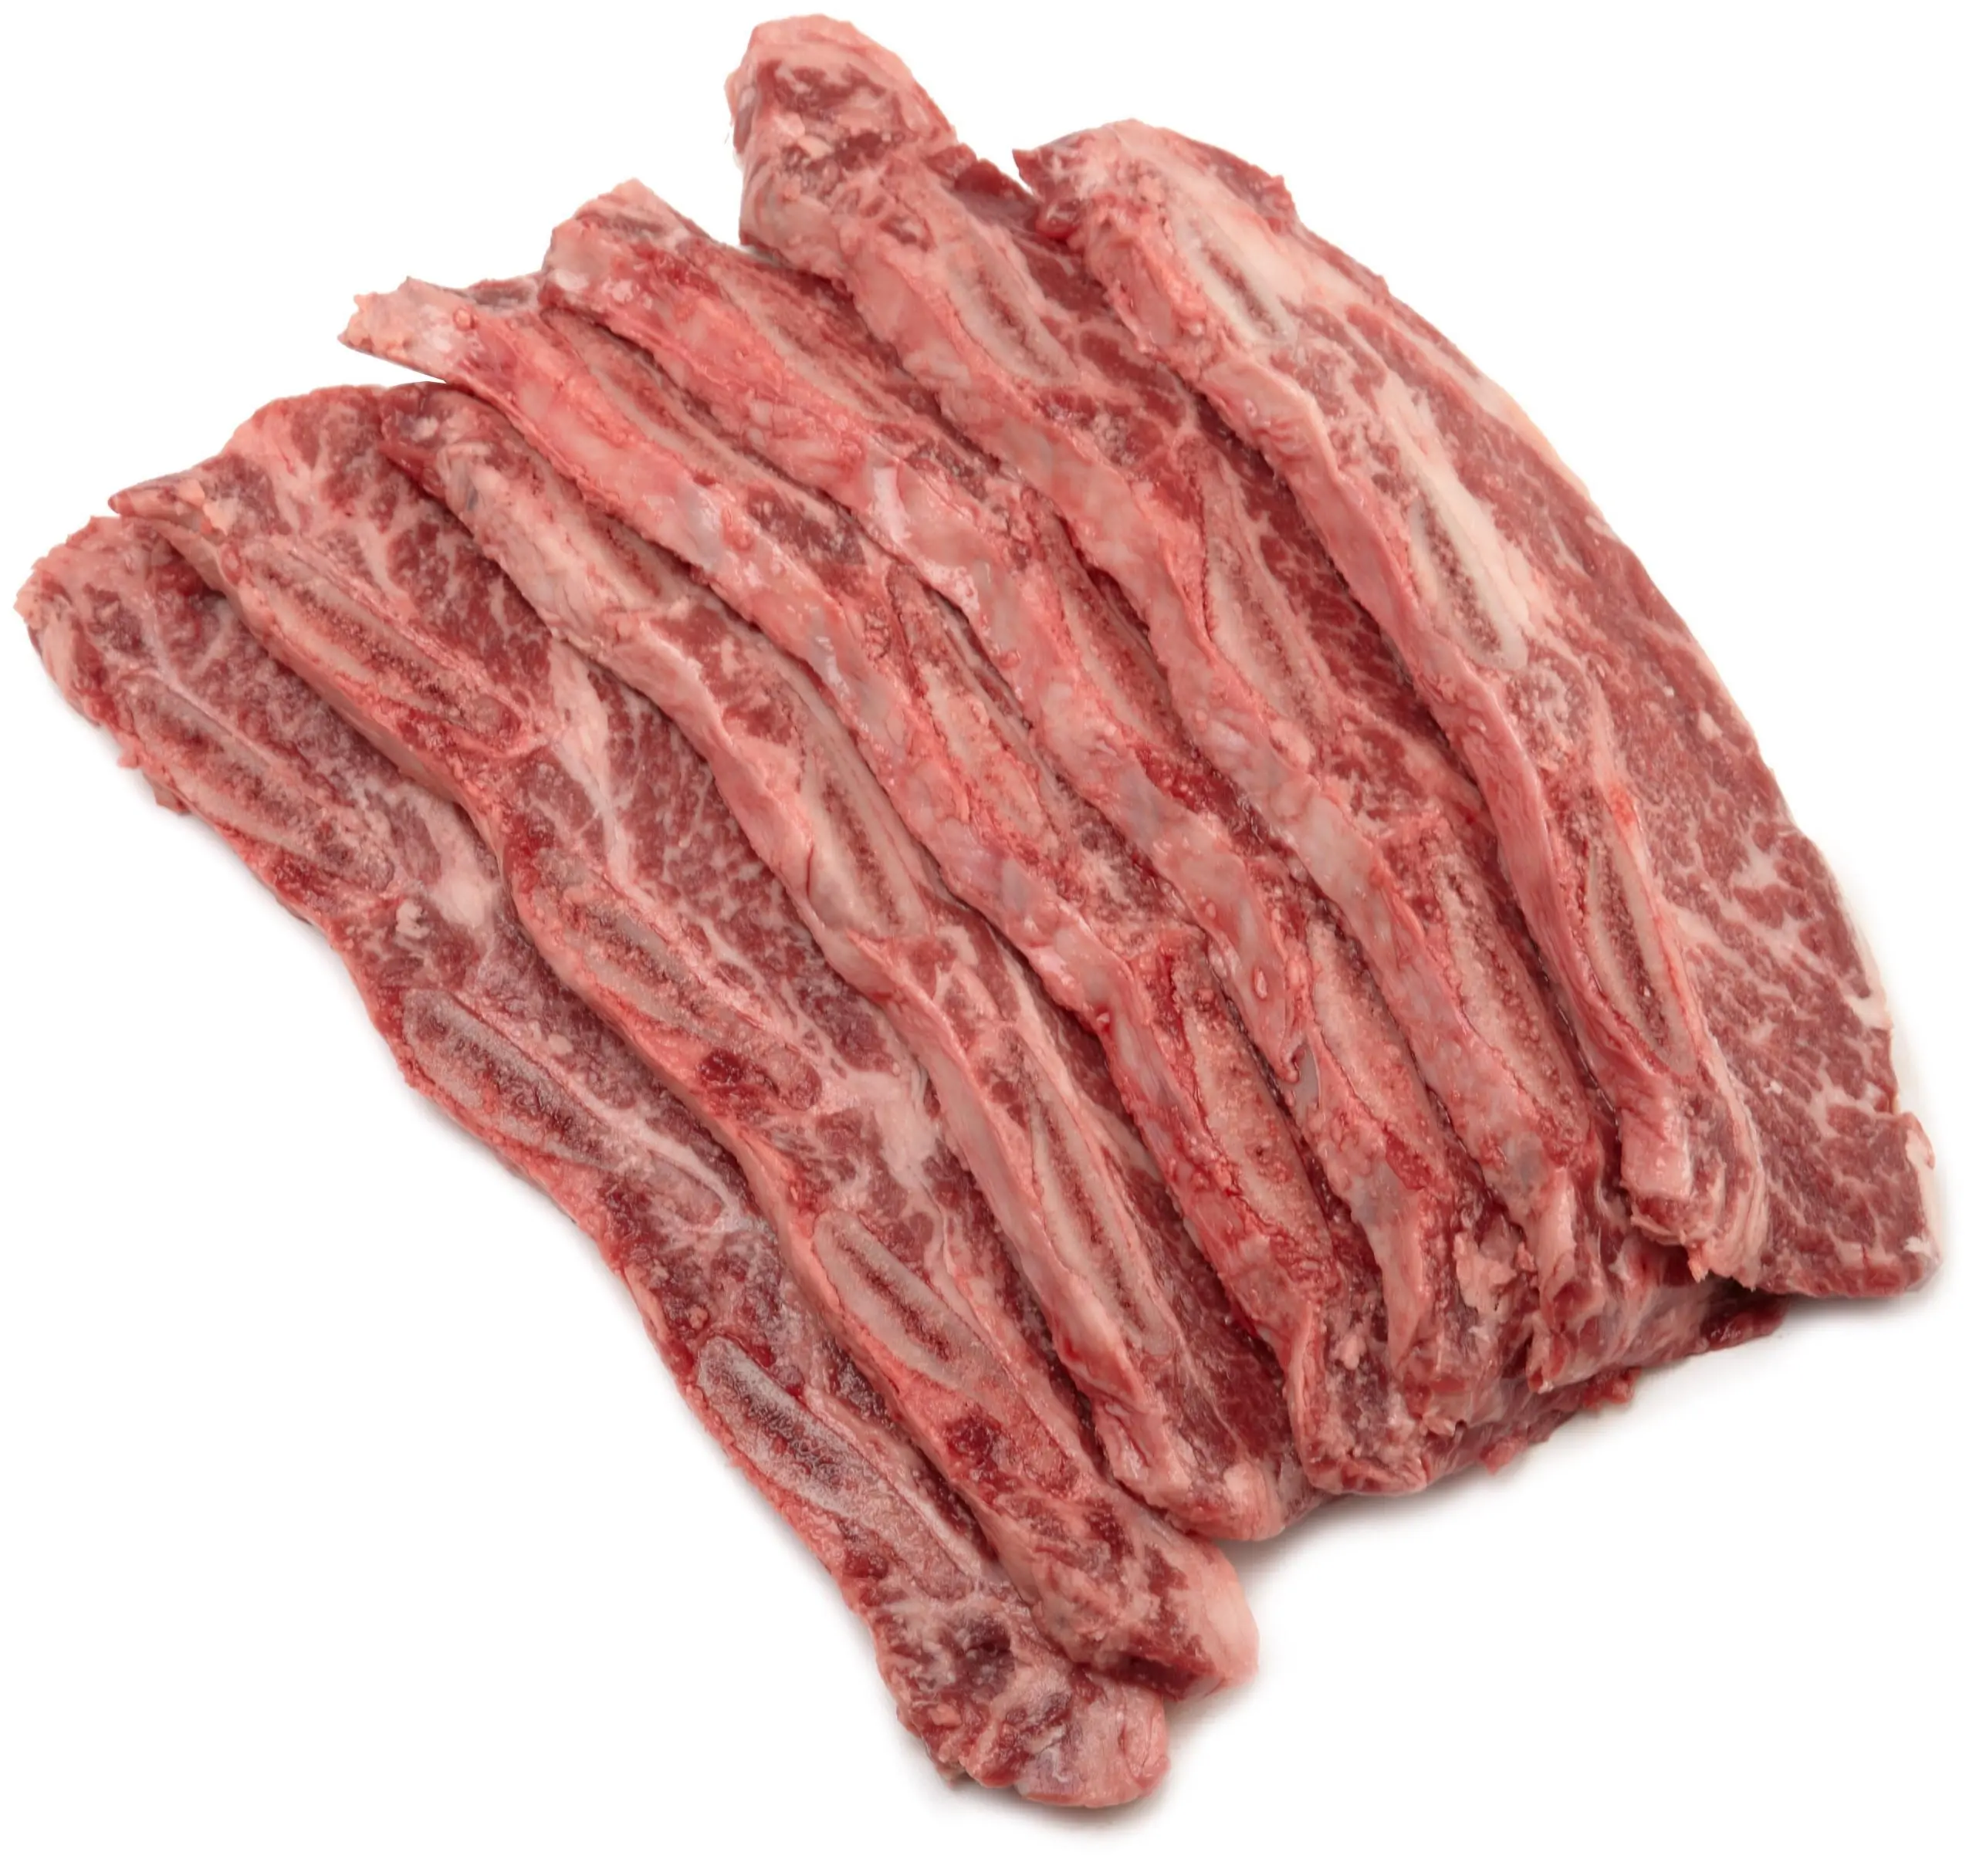 Beef curtains. 